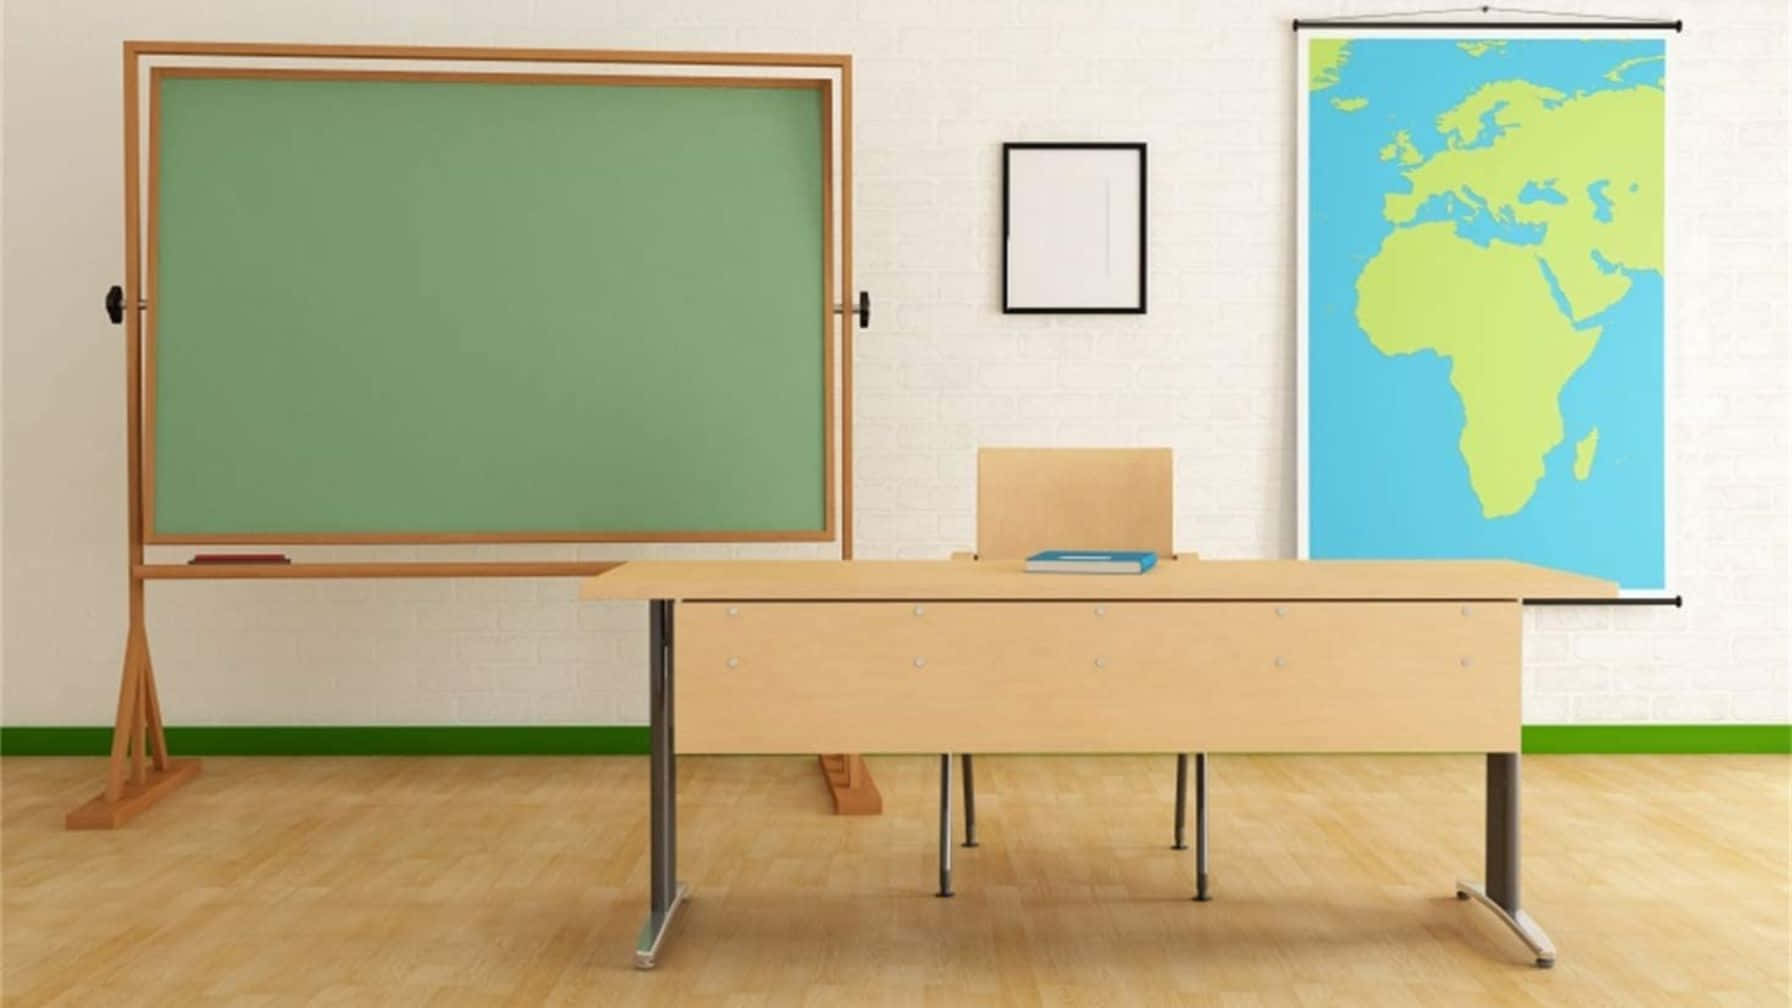 A Classroom With A Green Chalkboard And A Desk